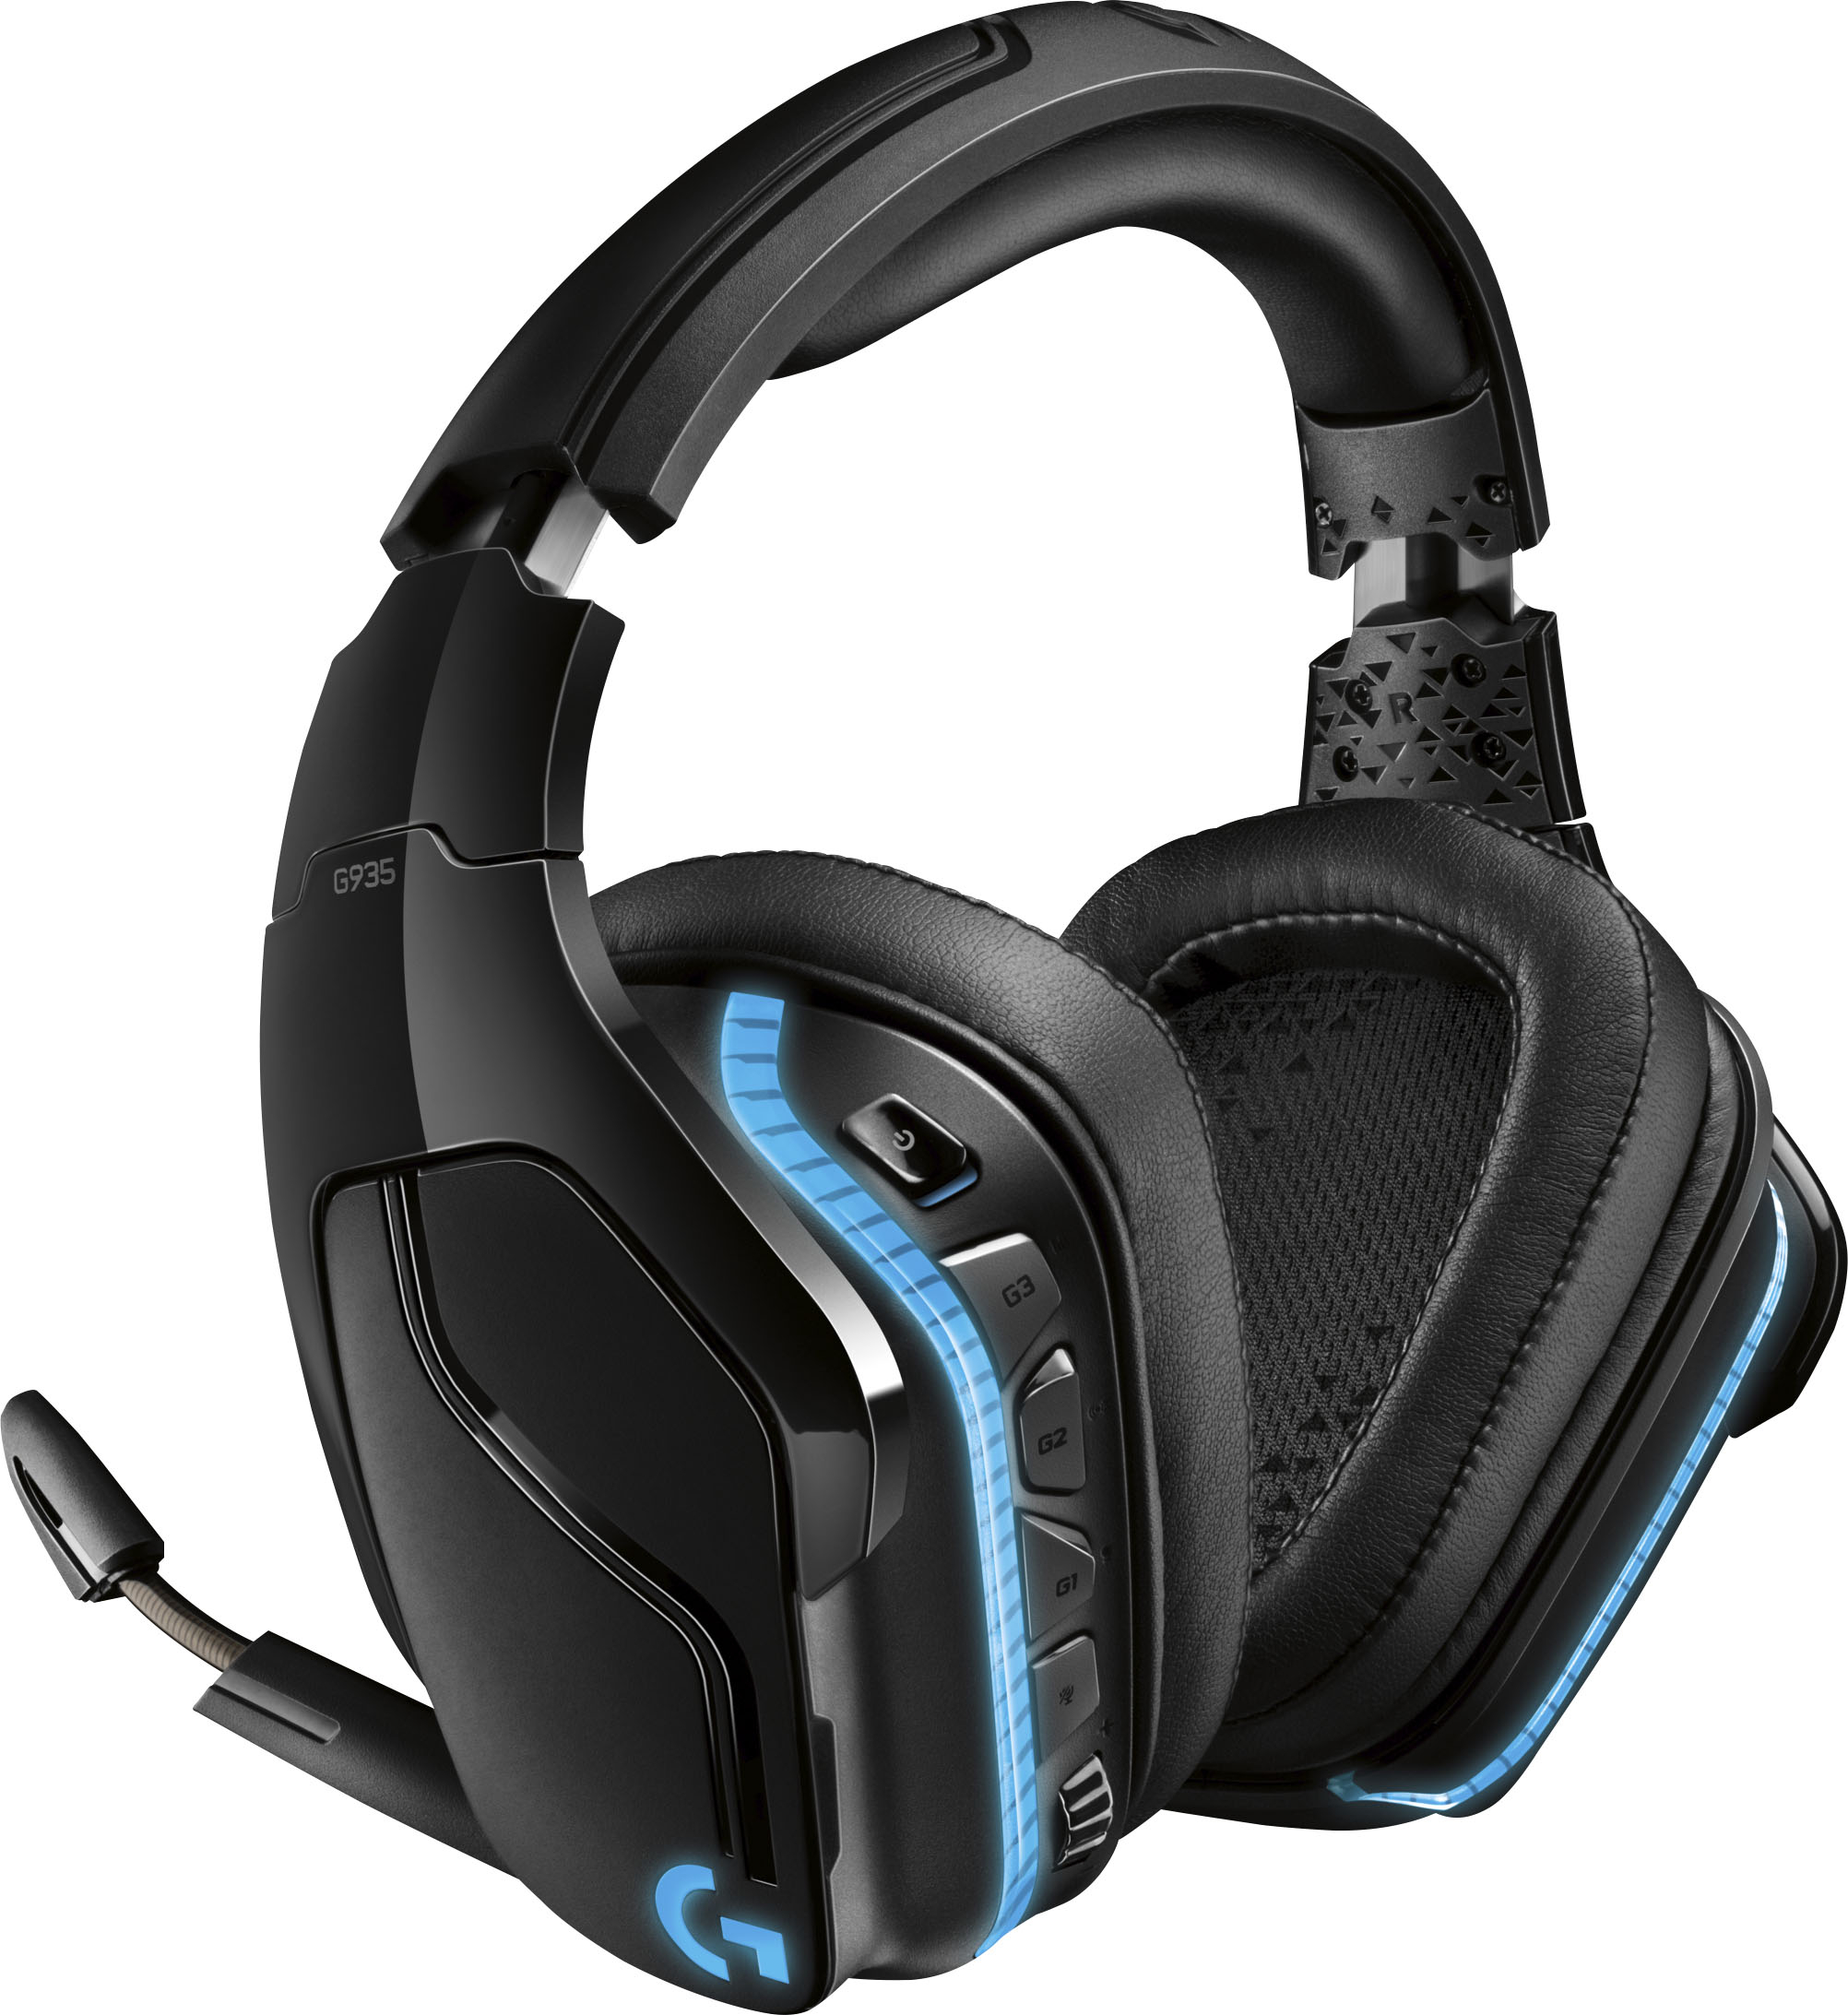 Logitech G935 Wireless 7.1 Surround Sound Over-the-Ear Gaming Headset for PC with RGB Lighting Black/Blue 981-000742 - Best Buy